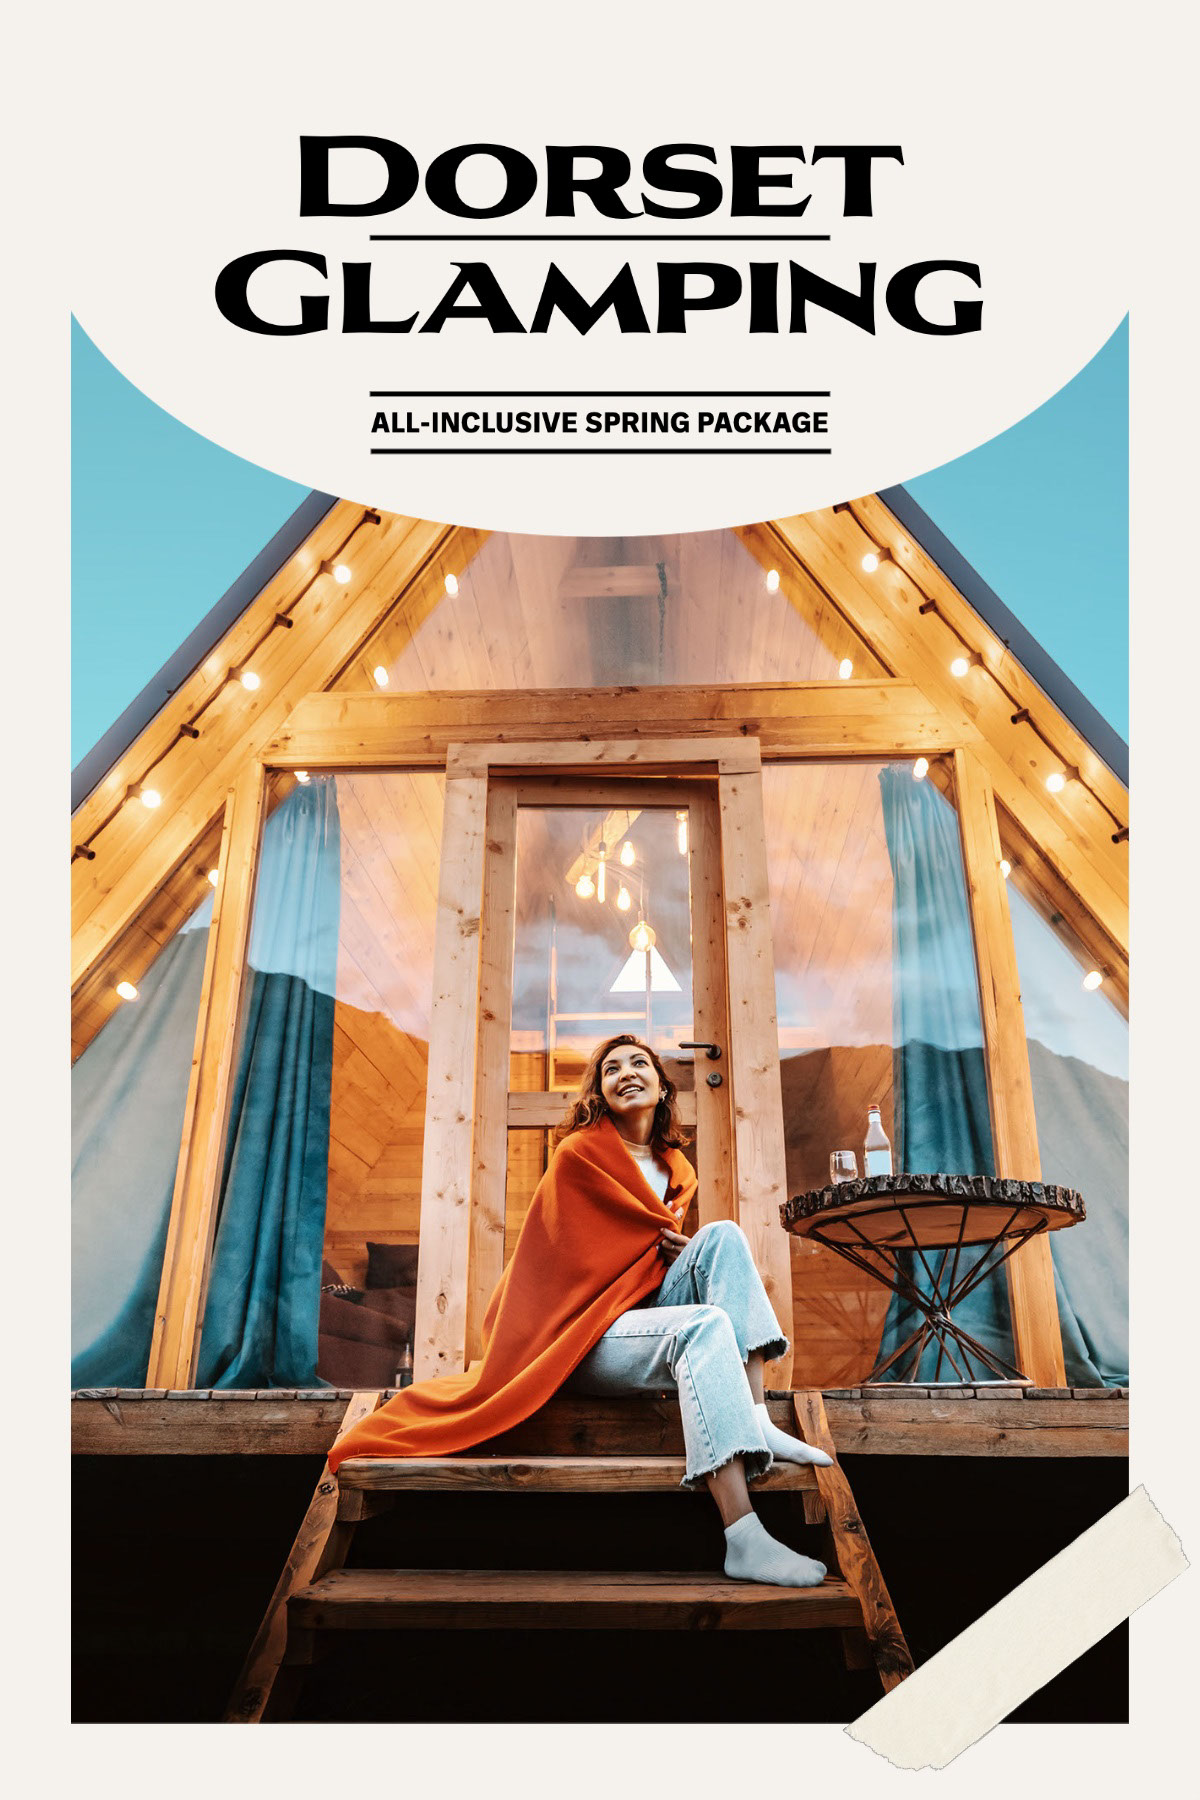 Beige Glamping Holiday Package Pinterest Post Dorset Glamping All-Inclusive Spring Package